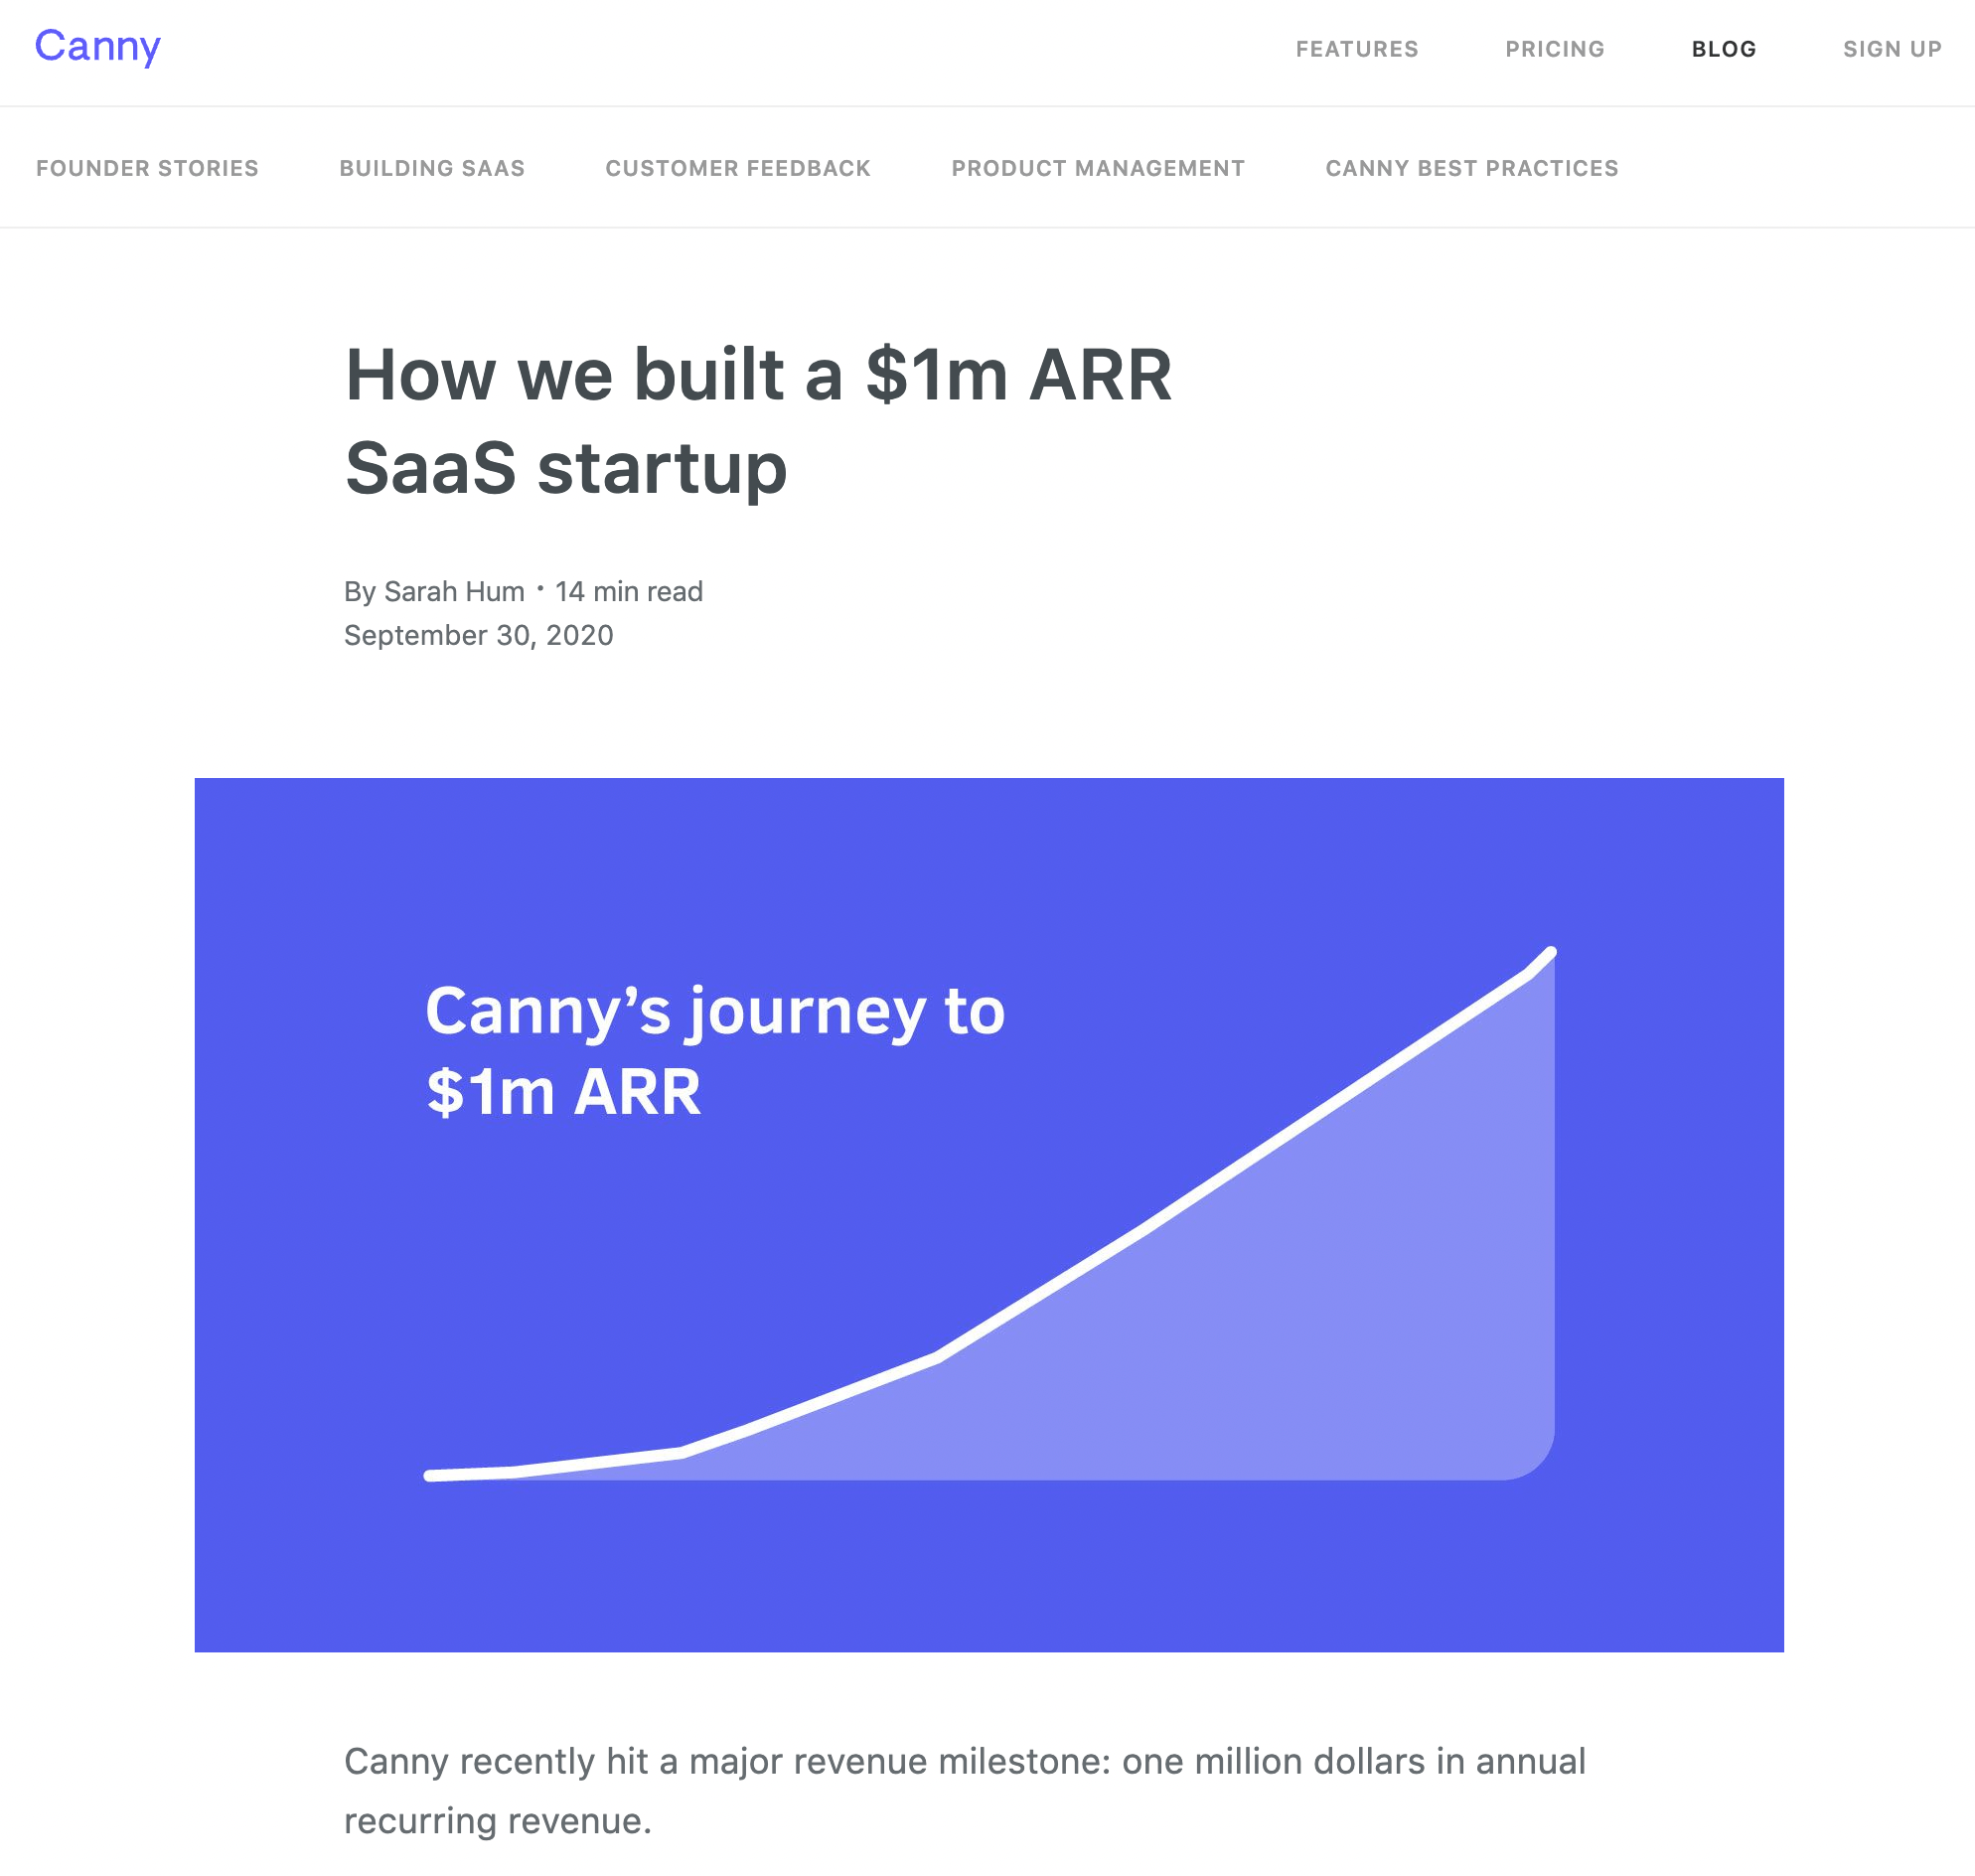 A screenshot of Canny's How we built a $1m ARR SaaS startup blog post